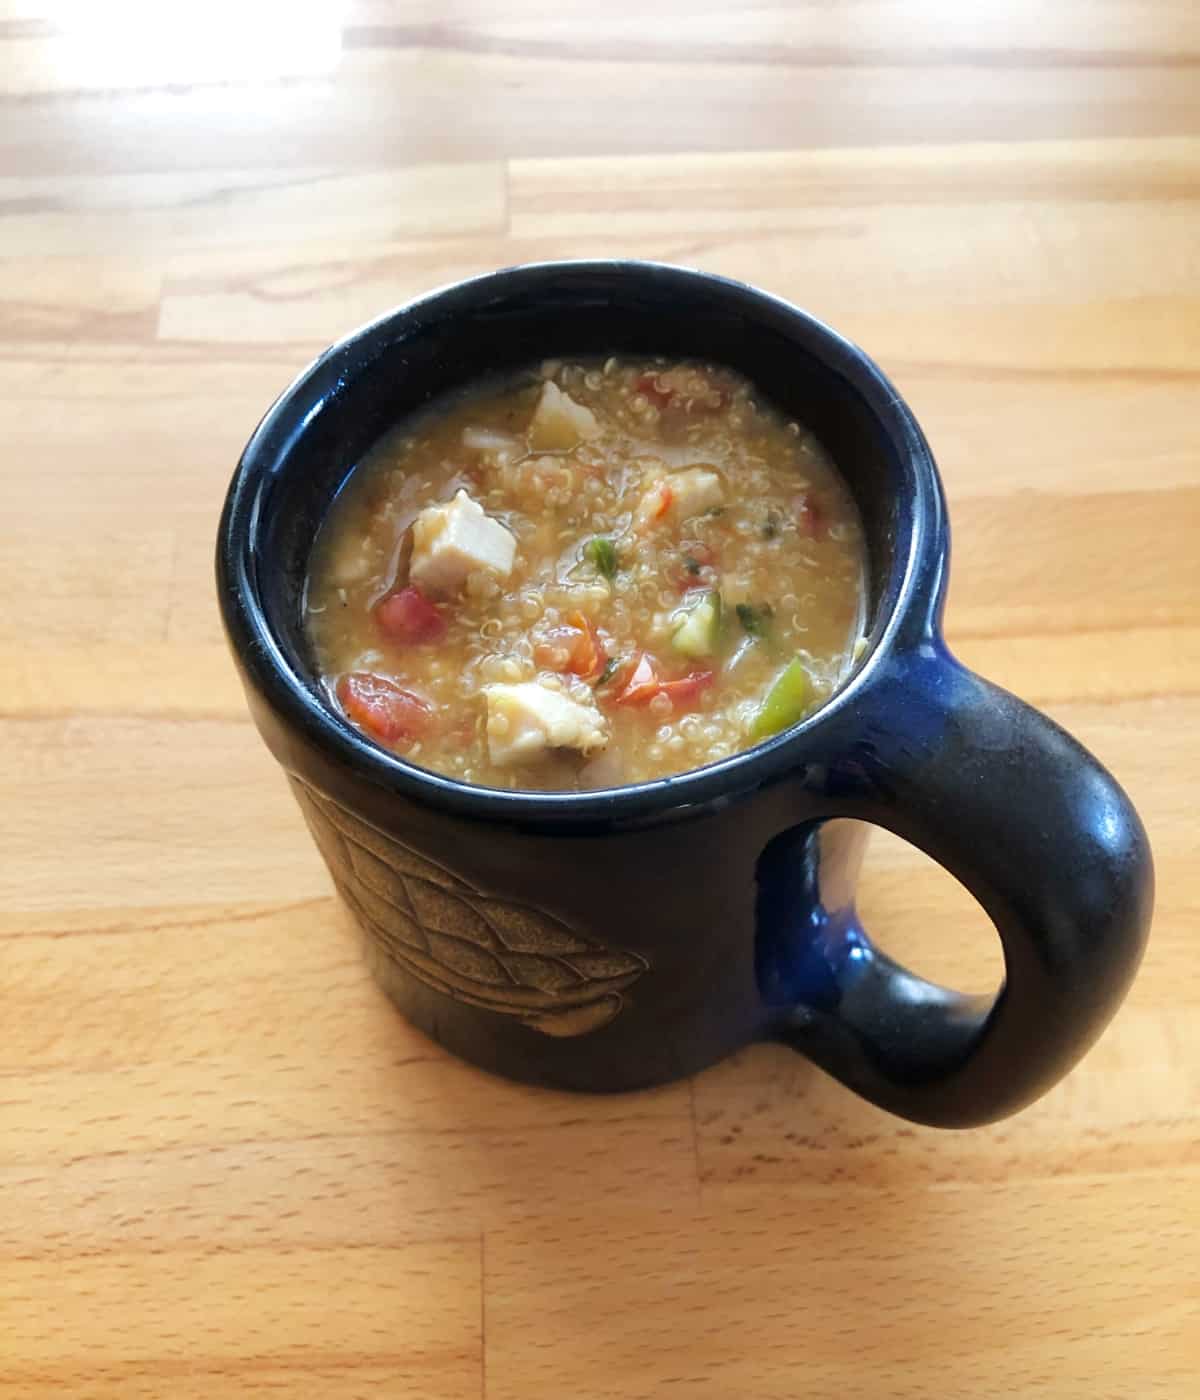 Chicken and quinoa soup in dark blue ceramic mug on wood table.